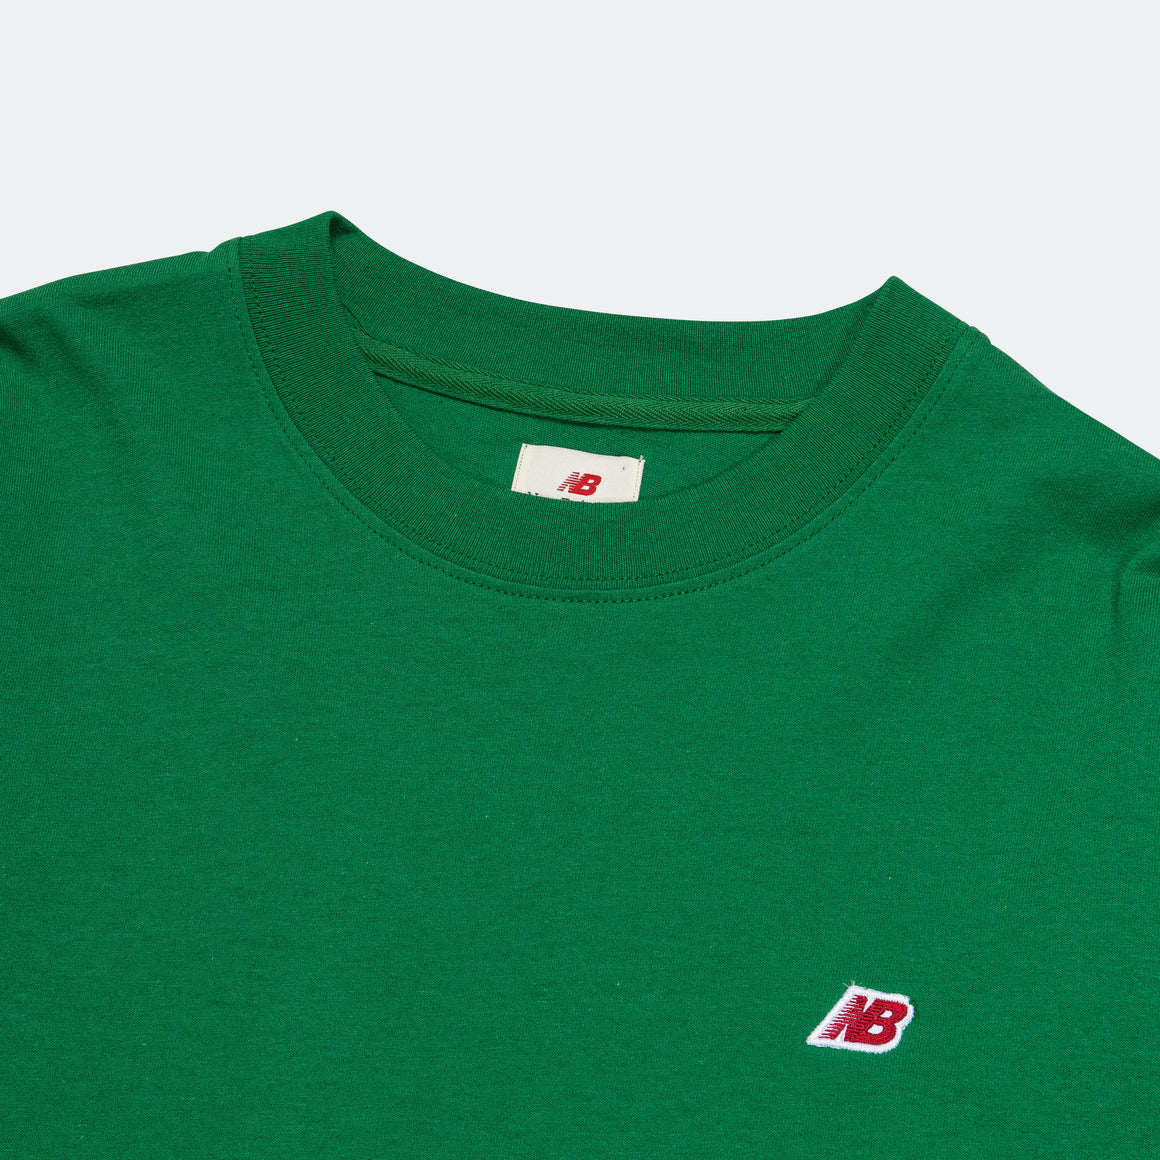 New Balance - MADE in USA Long Sleeve Tee - Classic Pine - UP THERE